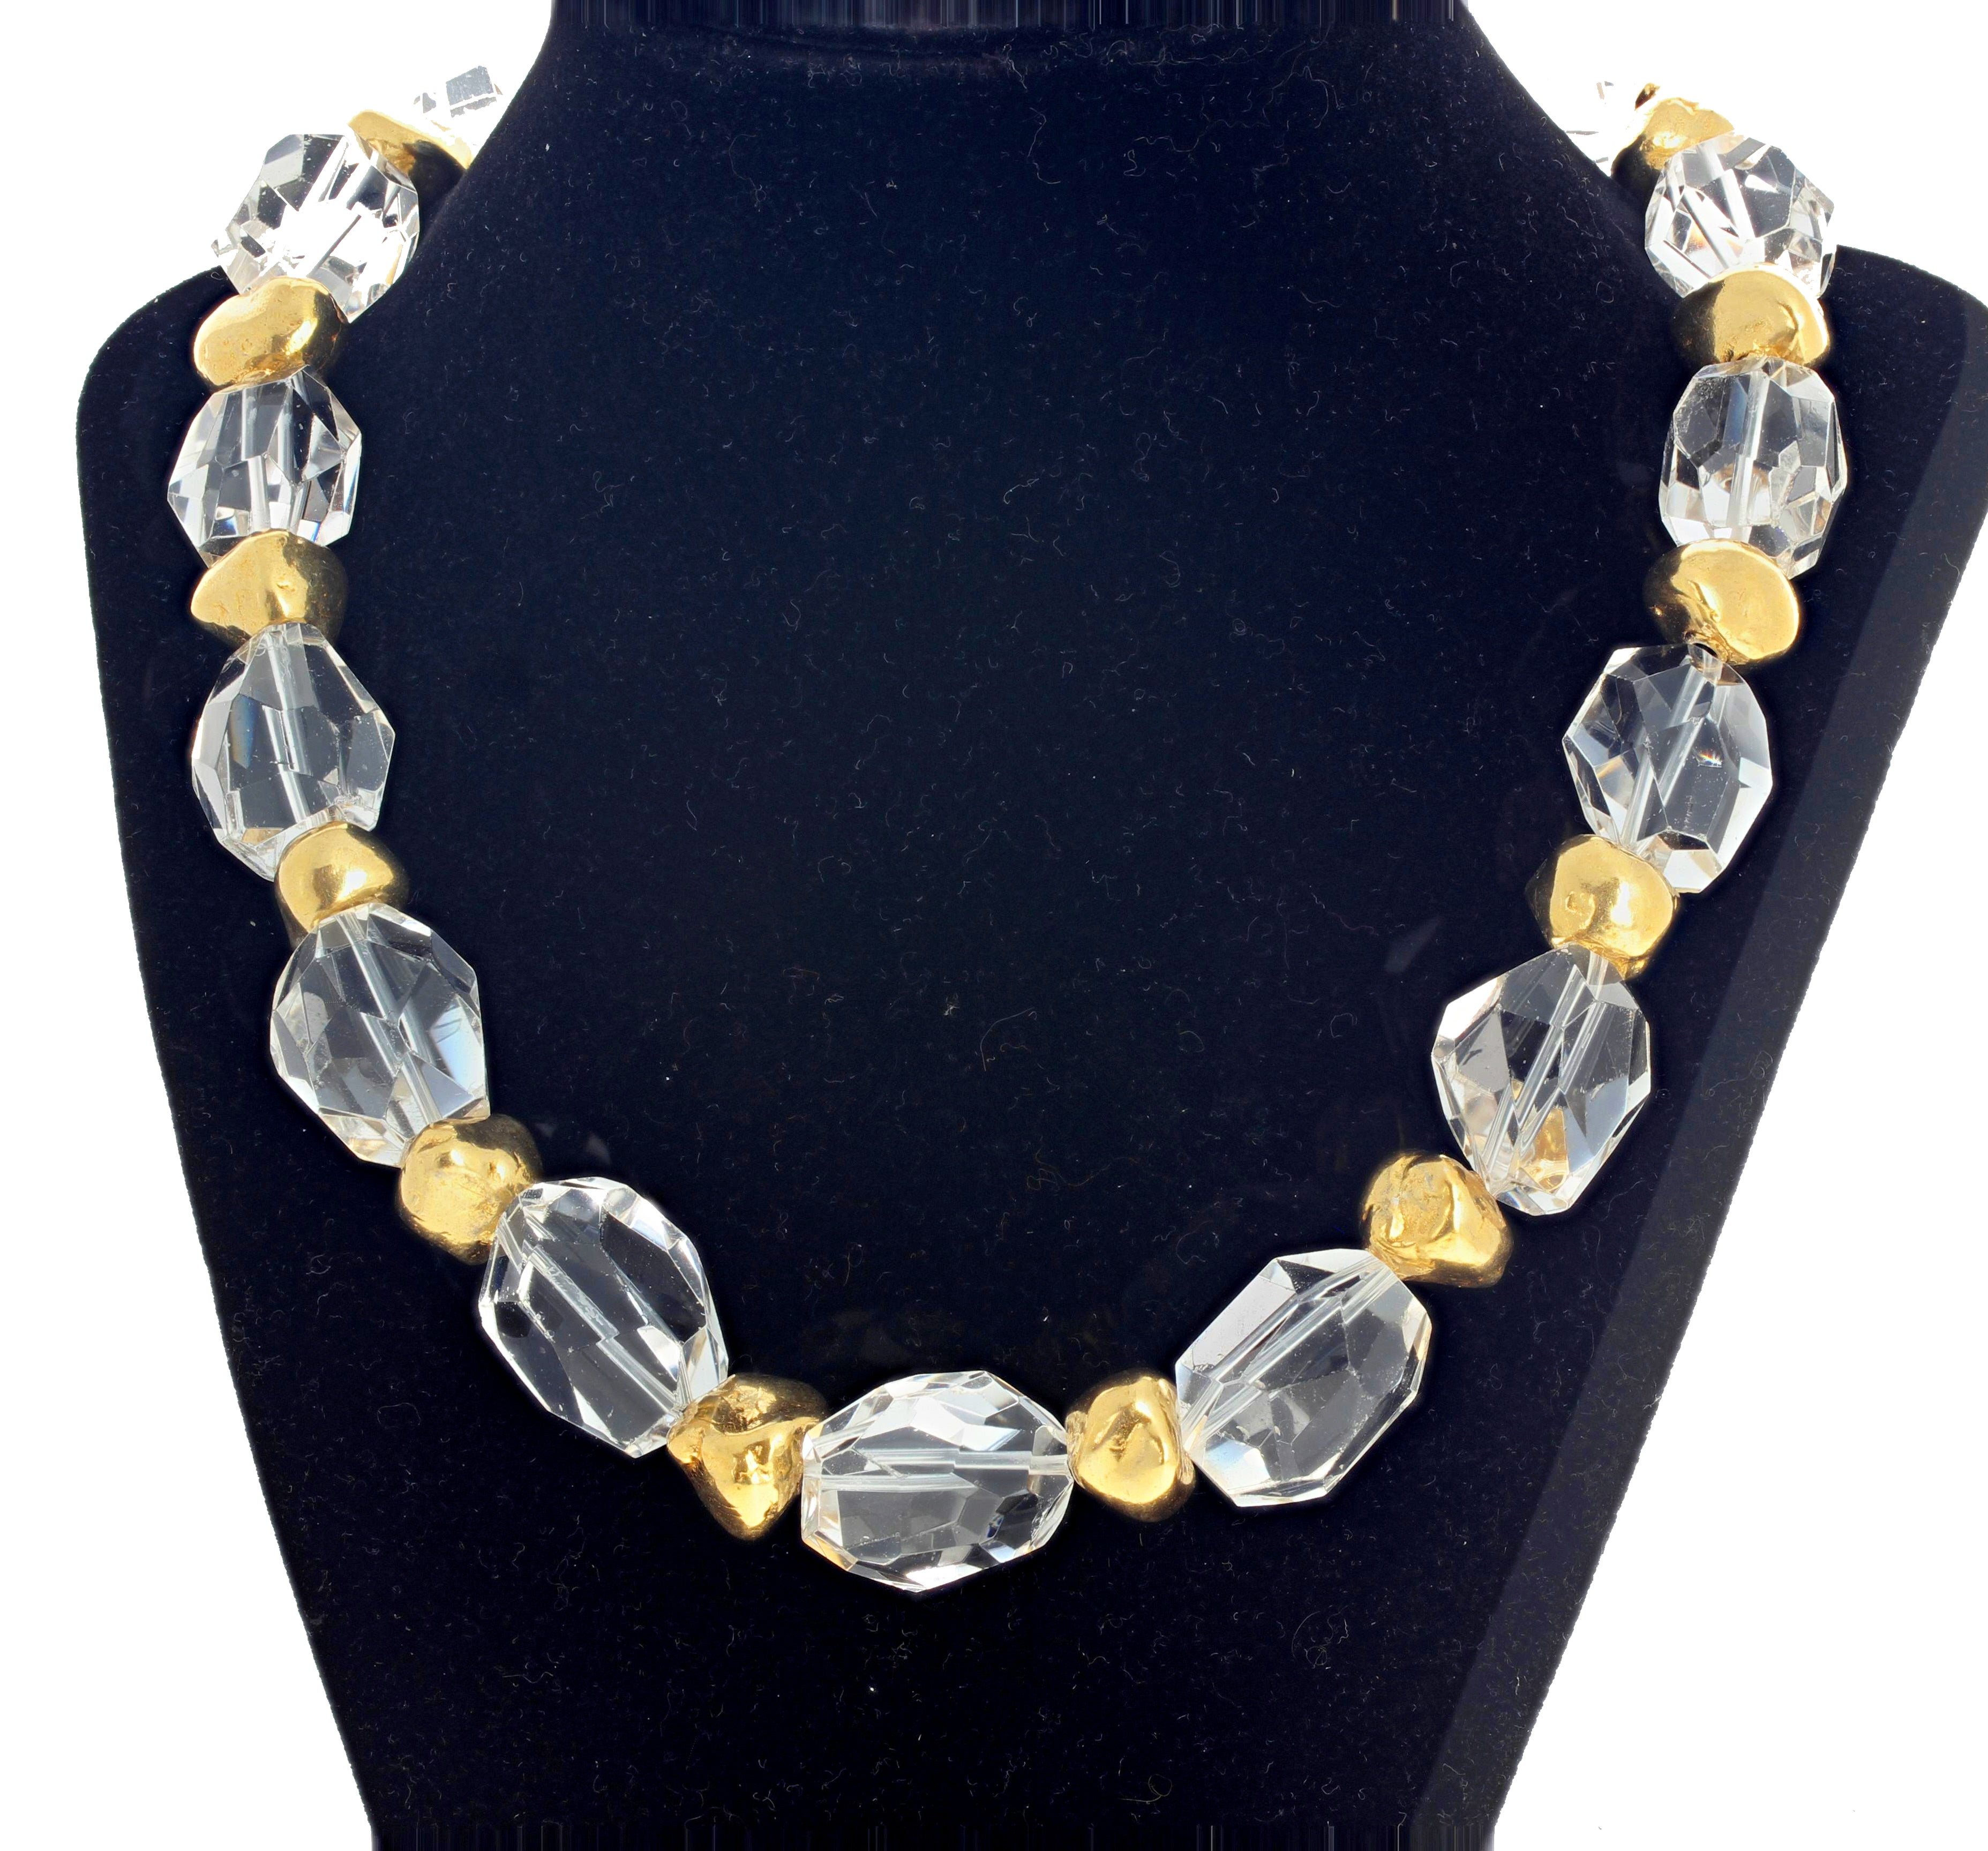 Highly glowing checkerboard gem cut and polished unique chunks of silvery white natural translucent Brazilian silver white Quartz accented with goldy coated nuggets in this beautiful unique 17 inch long necklace with easy to use hook clasp.  The